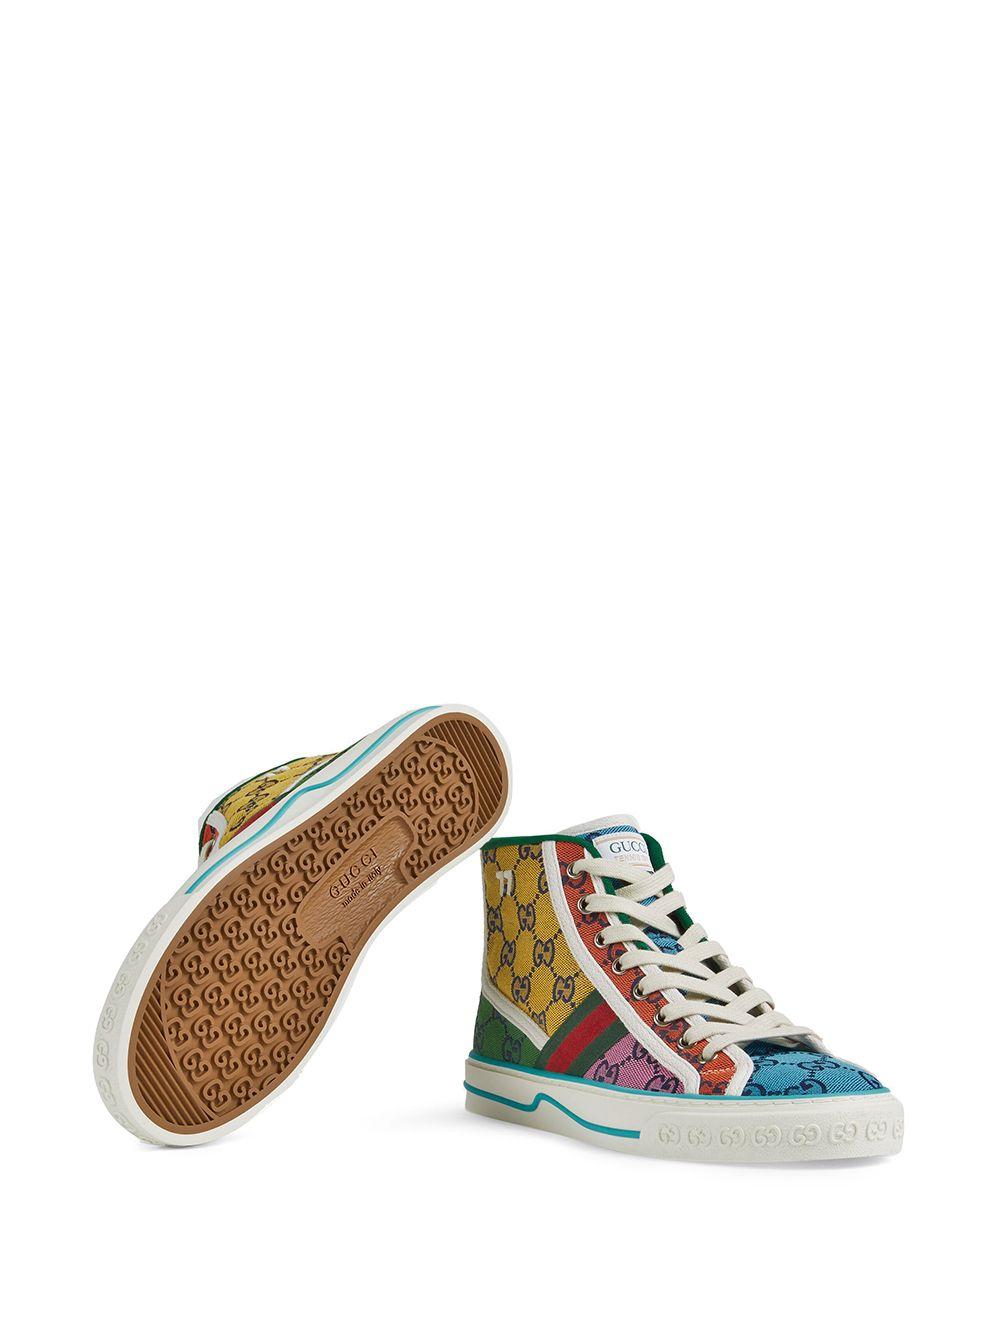 Gucci Tennis 1977 GG Multicolor High-top Sneakers in Yellow - Lyst